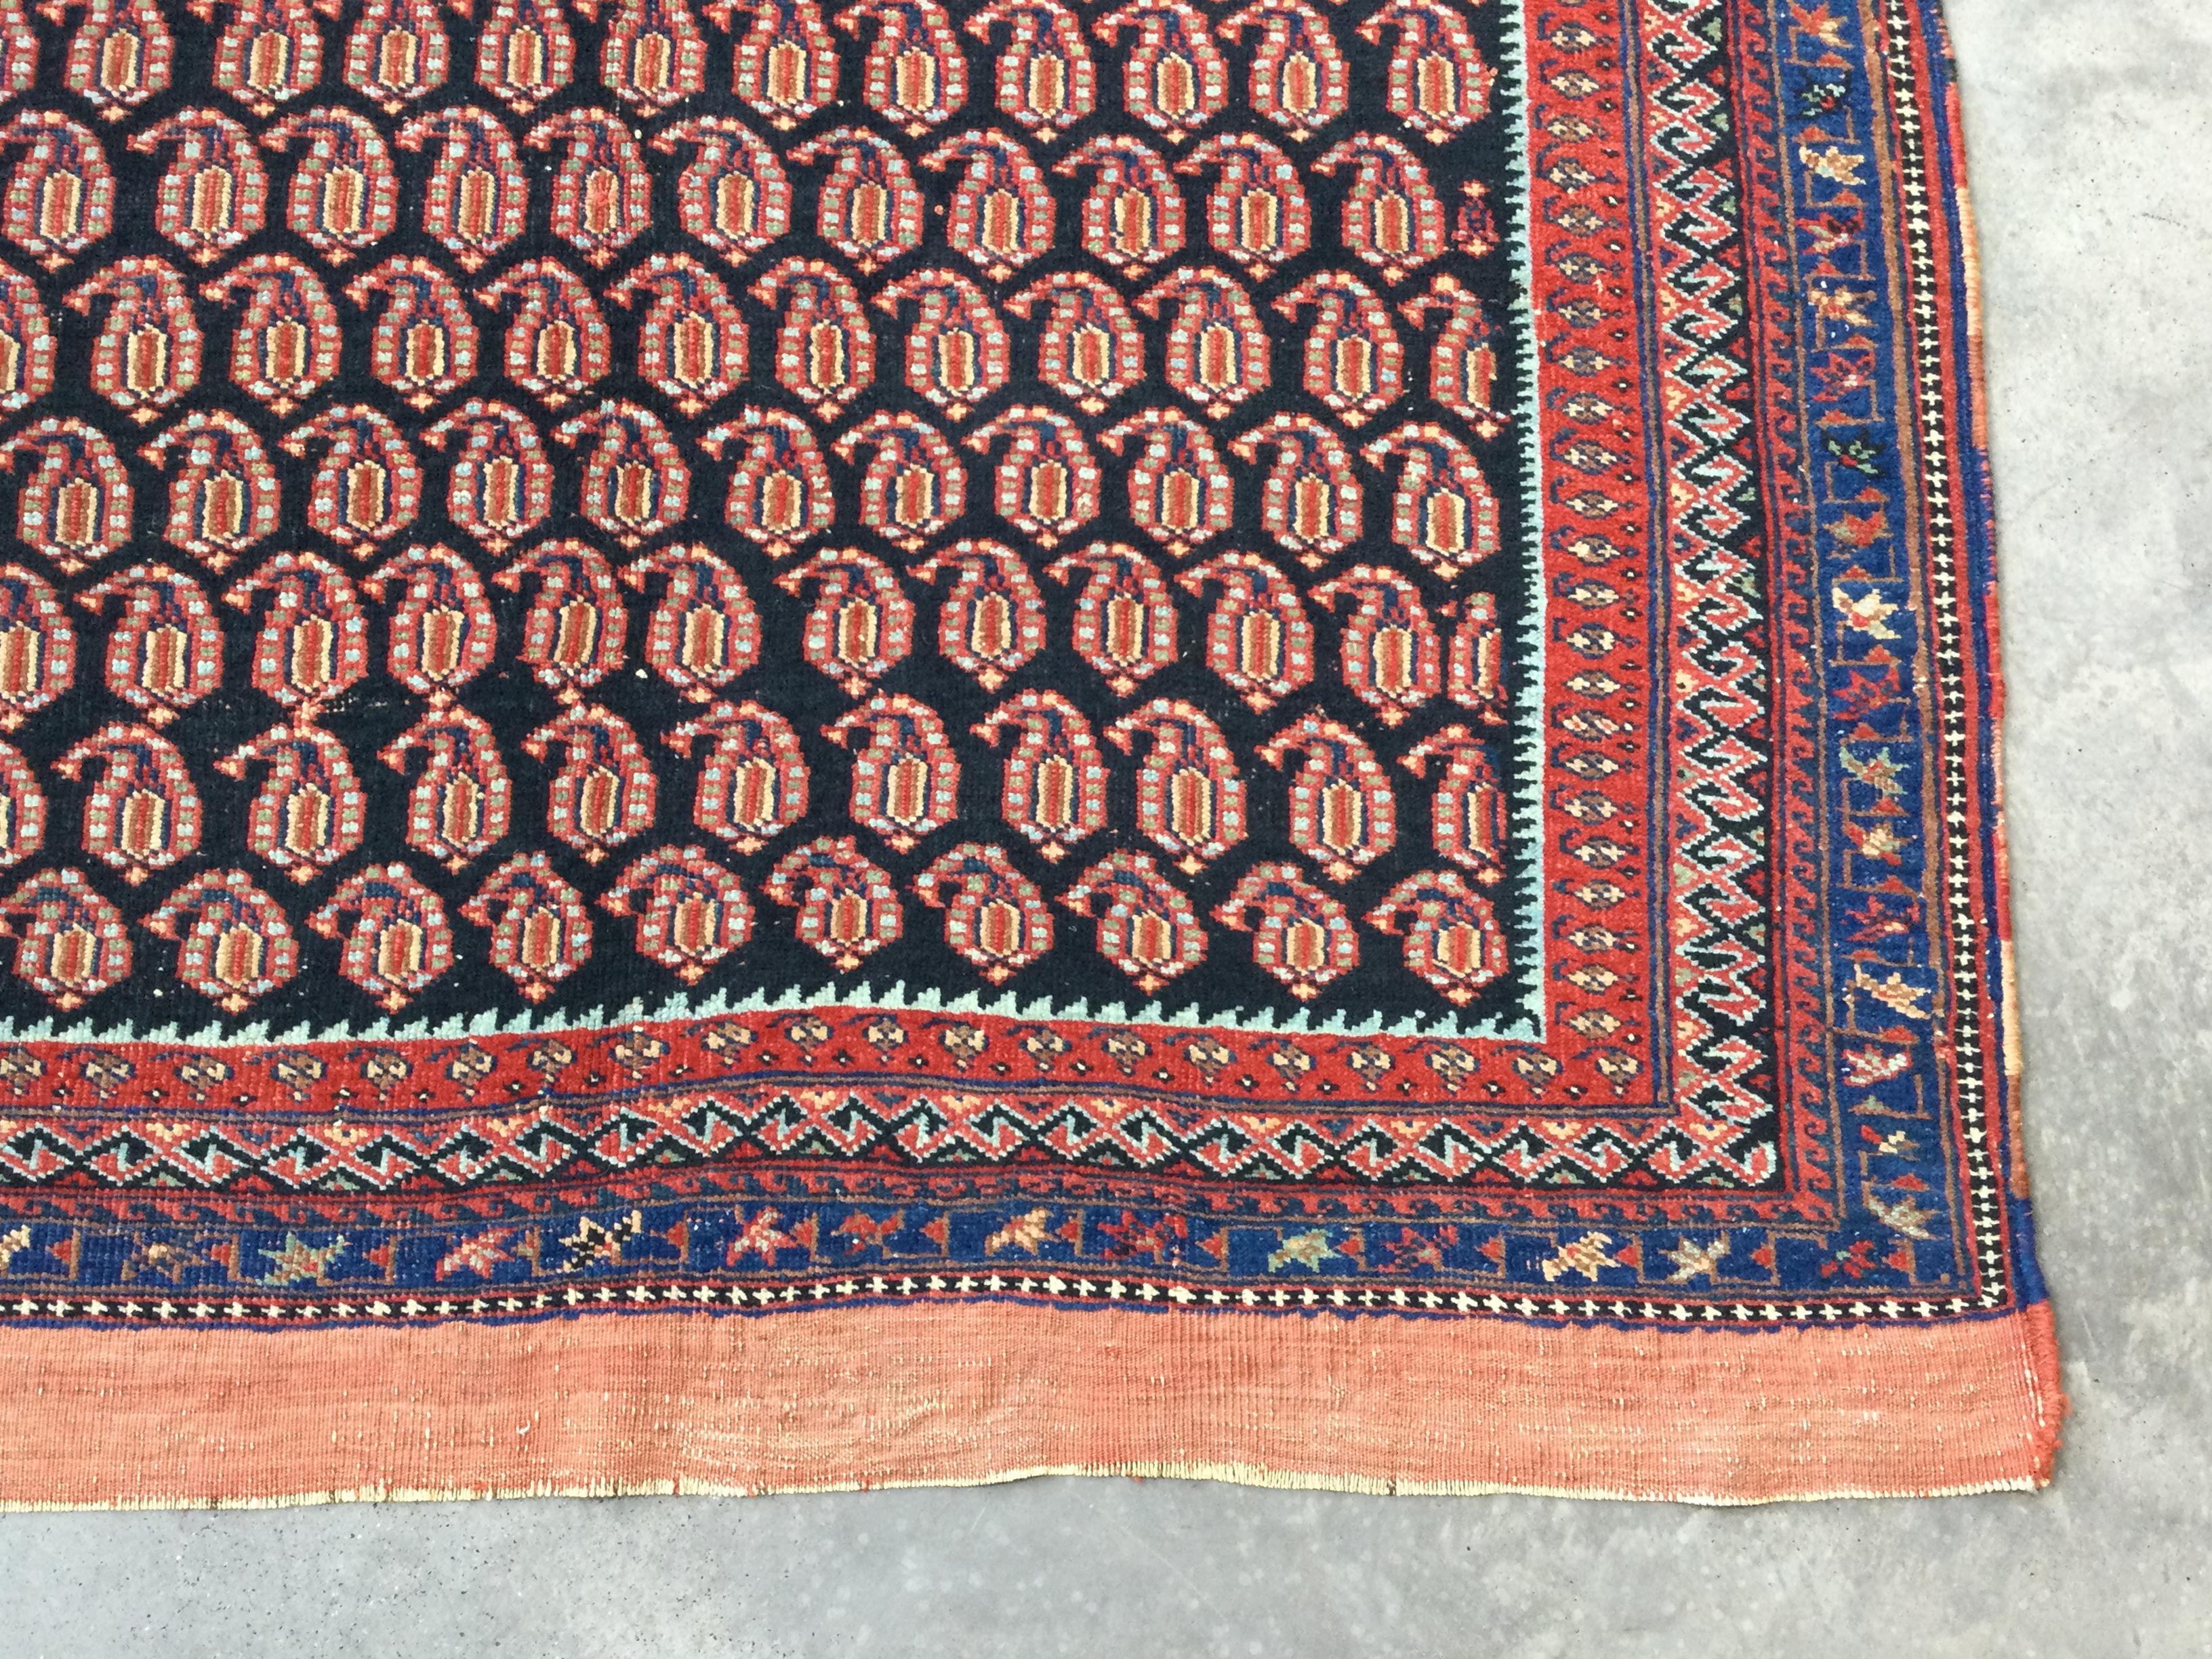 Hand-Knotted Classic Senneh. Bothe Design. Handmade Wool Rug. 1.65 x 1.25 m. For Sale